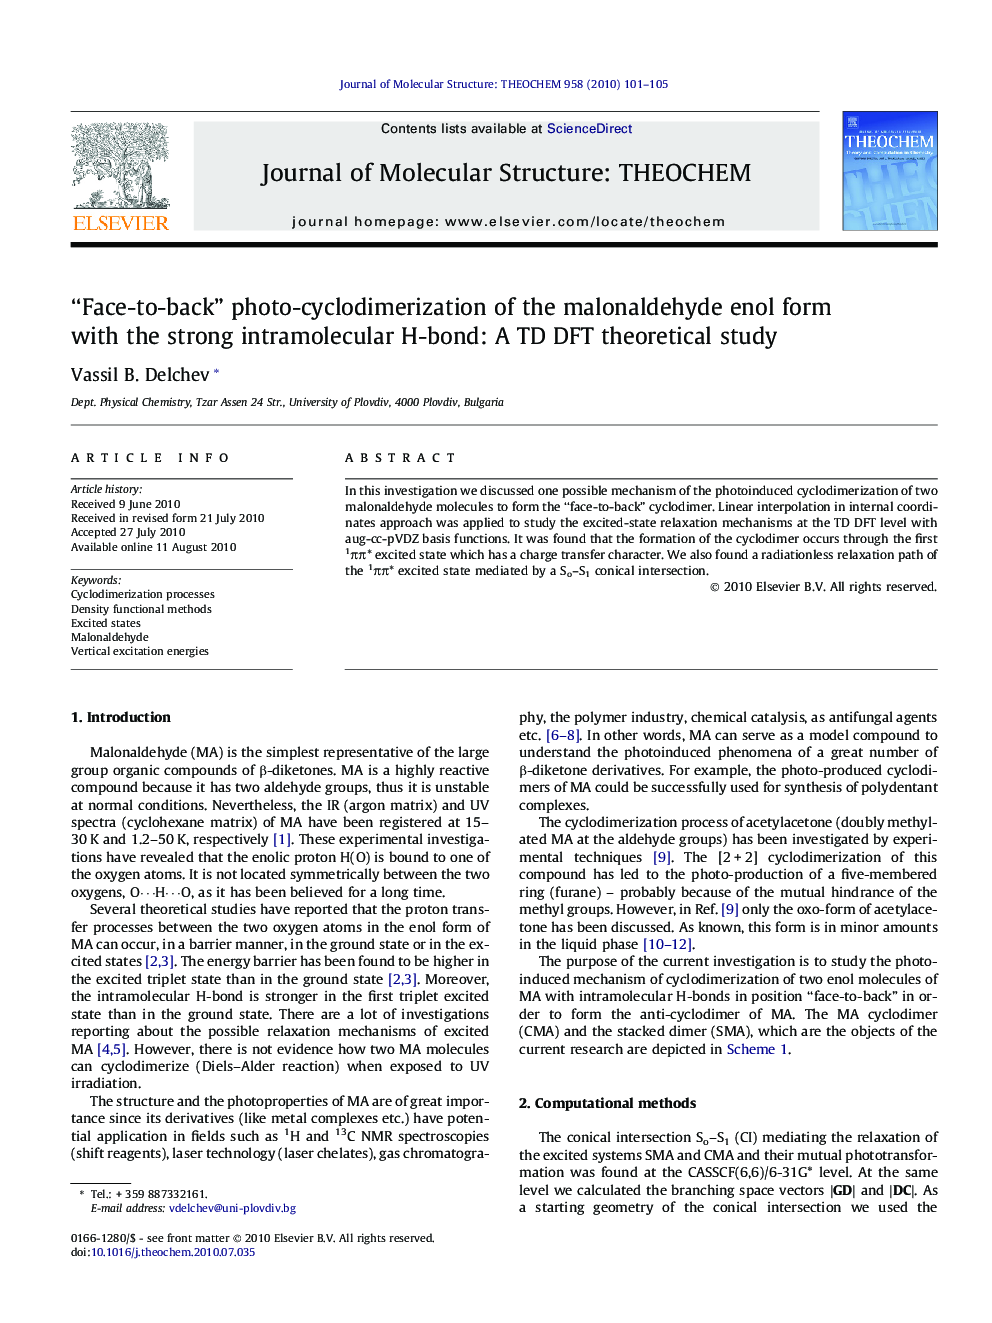 “Face-to-back” photo-cyclodimerization of the malonaldehyde enol form with the strong intramolecular H-bond: A TD DFT theoretical study